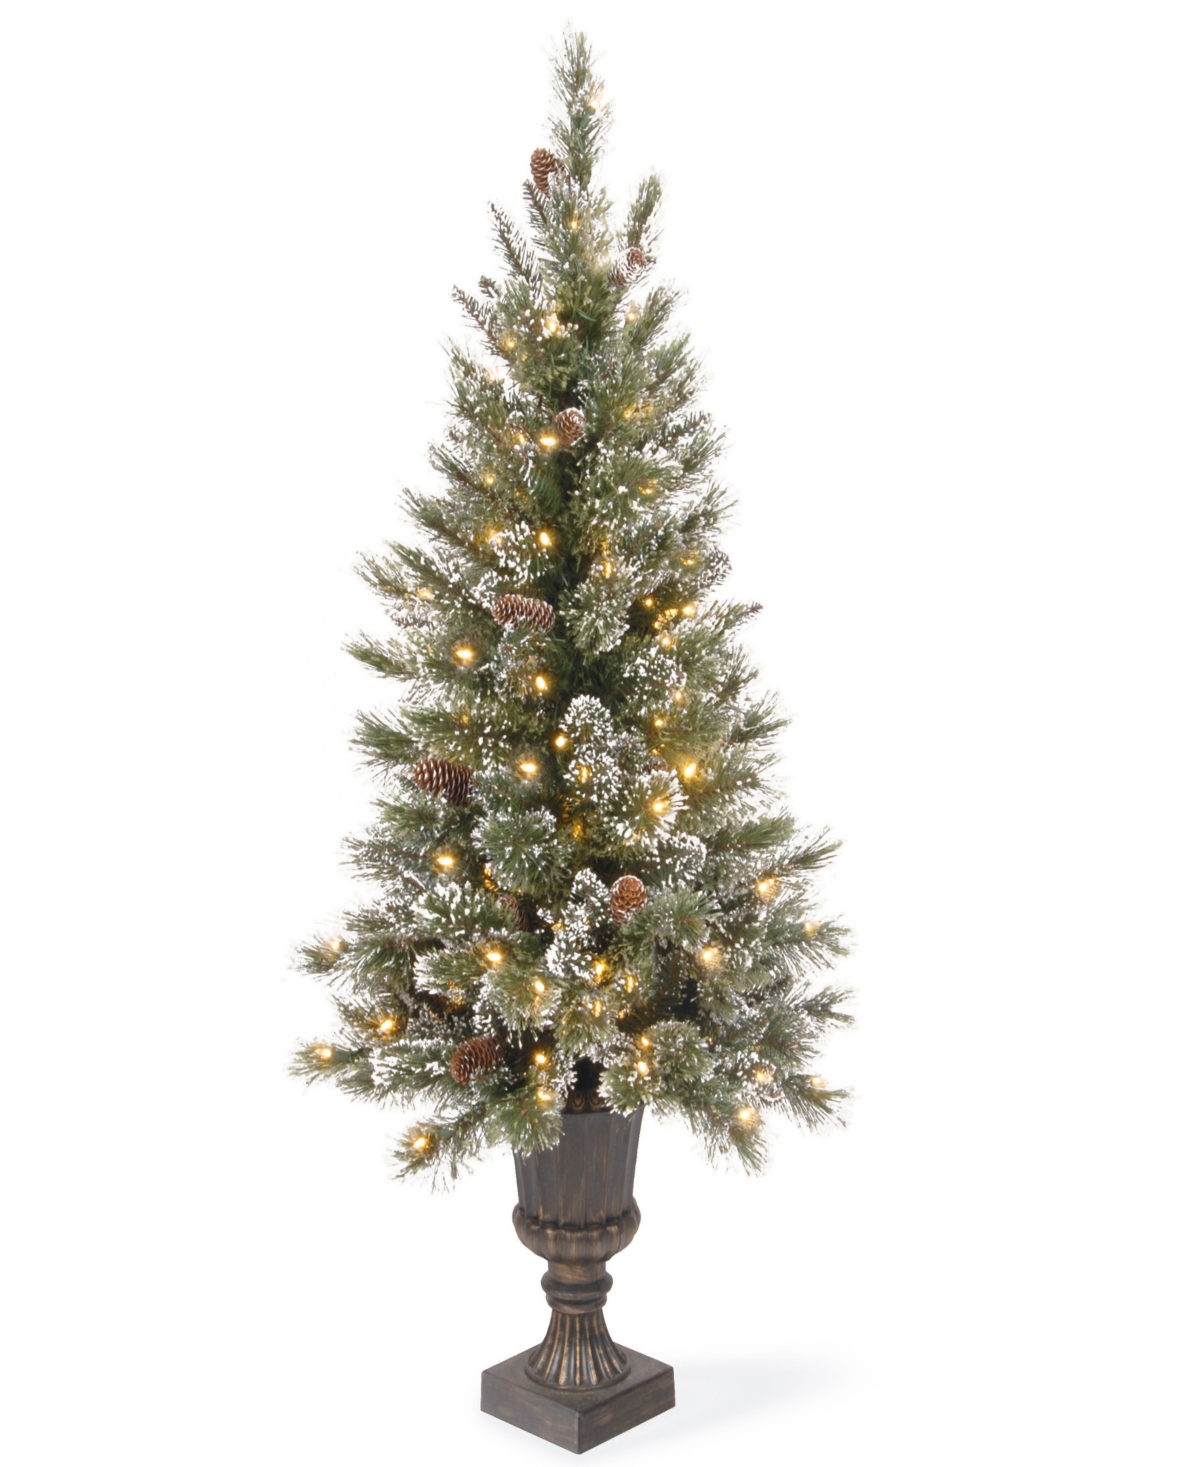 National Tree Company 4' Glittery Bristle Pine Entrance Tree With Twinkly Led Lights In Green